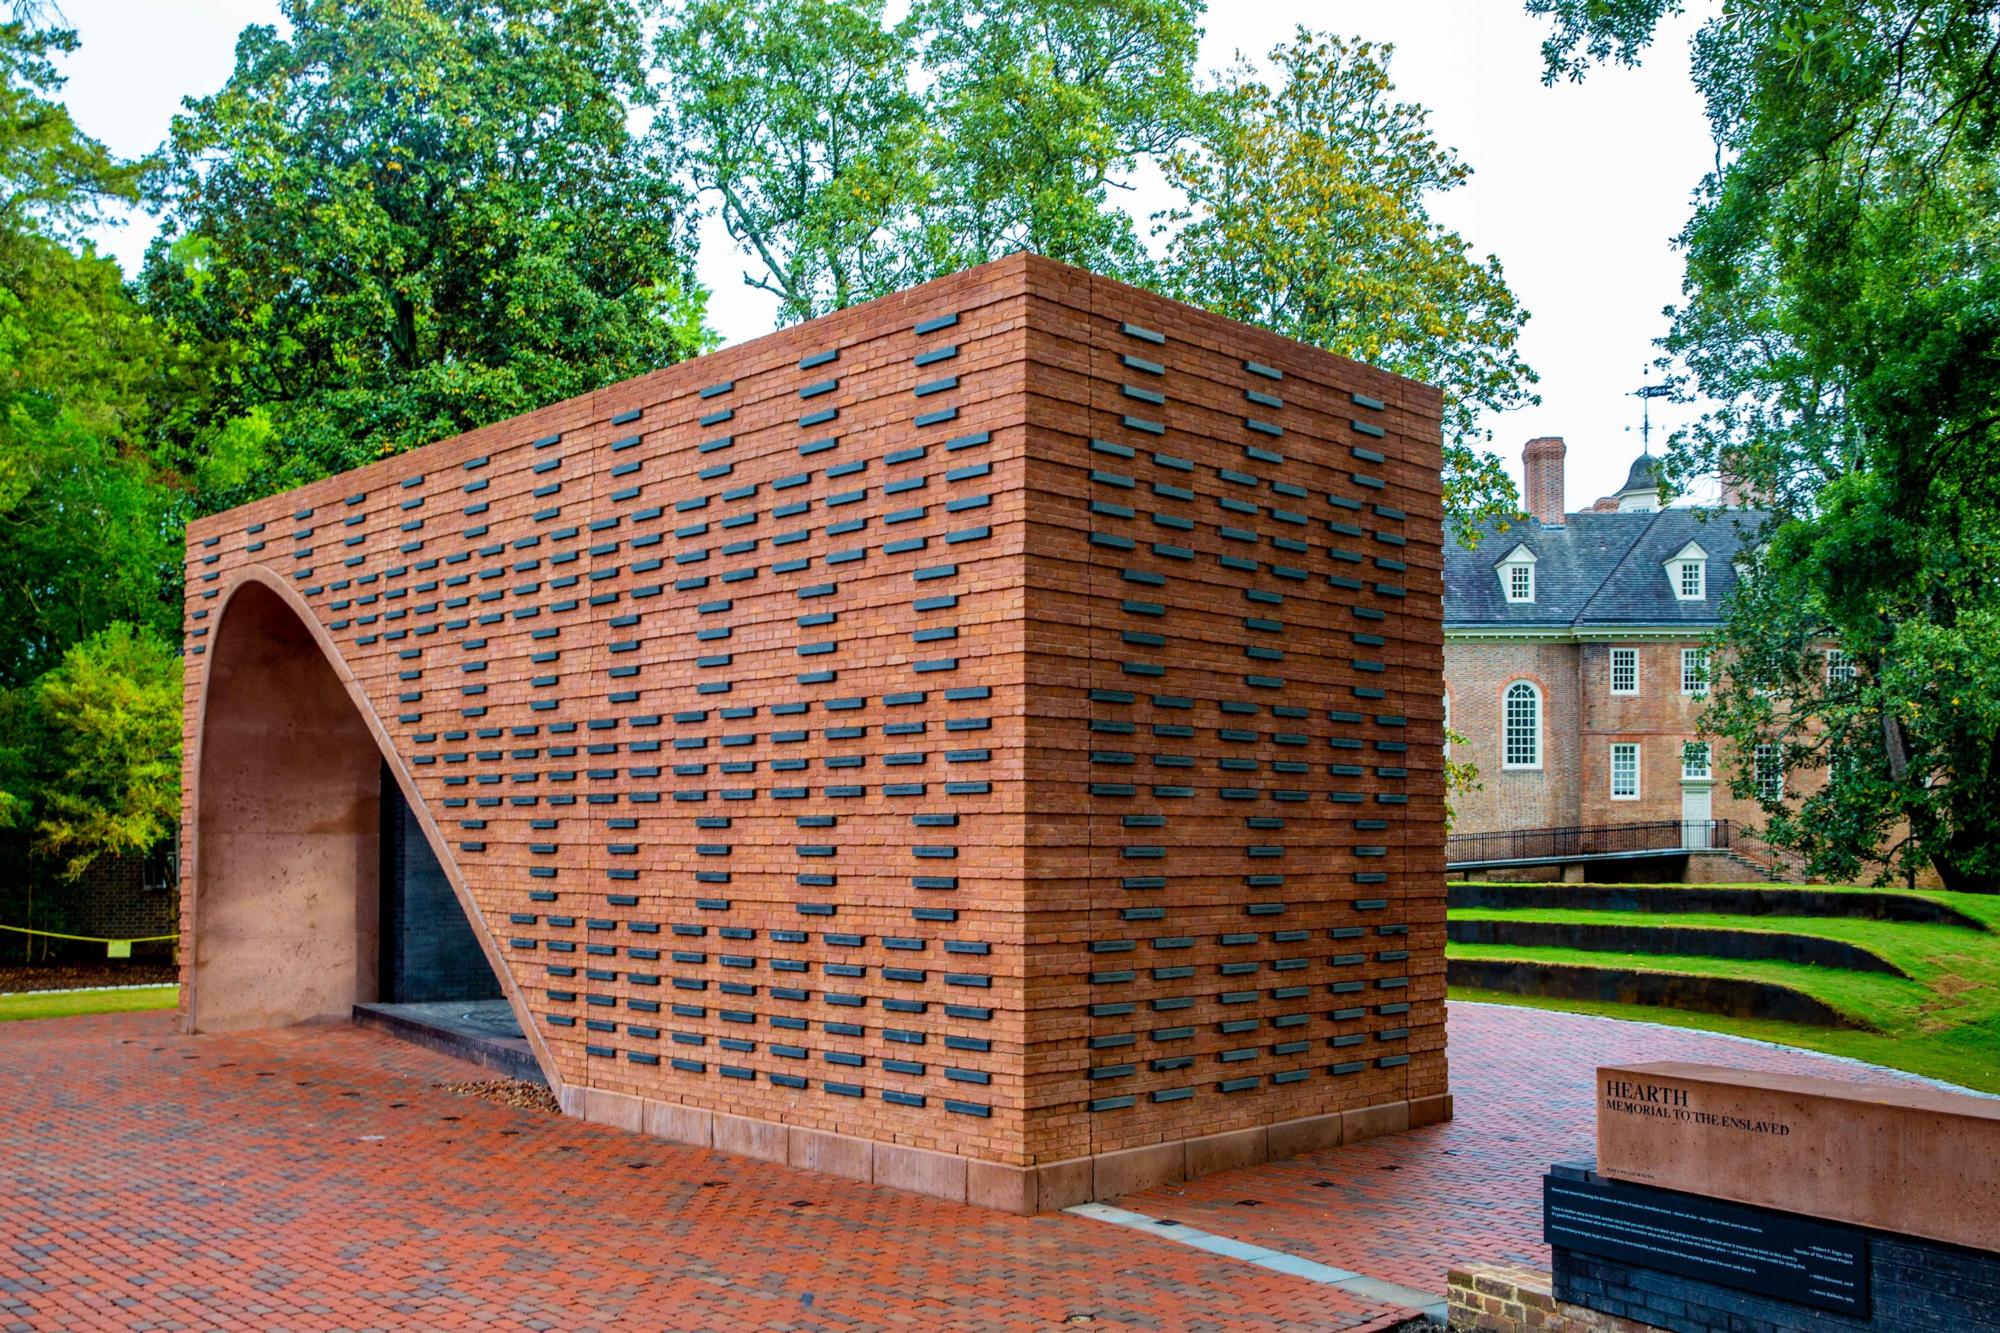 The red bricked memorial known as Hearth, Memorial to the Enslaved